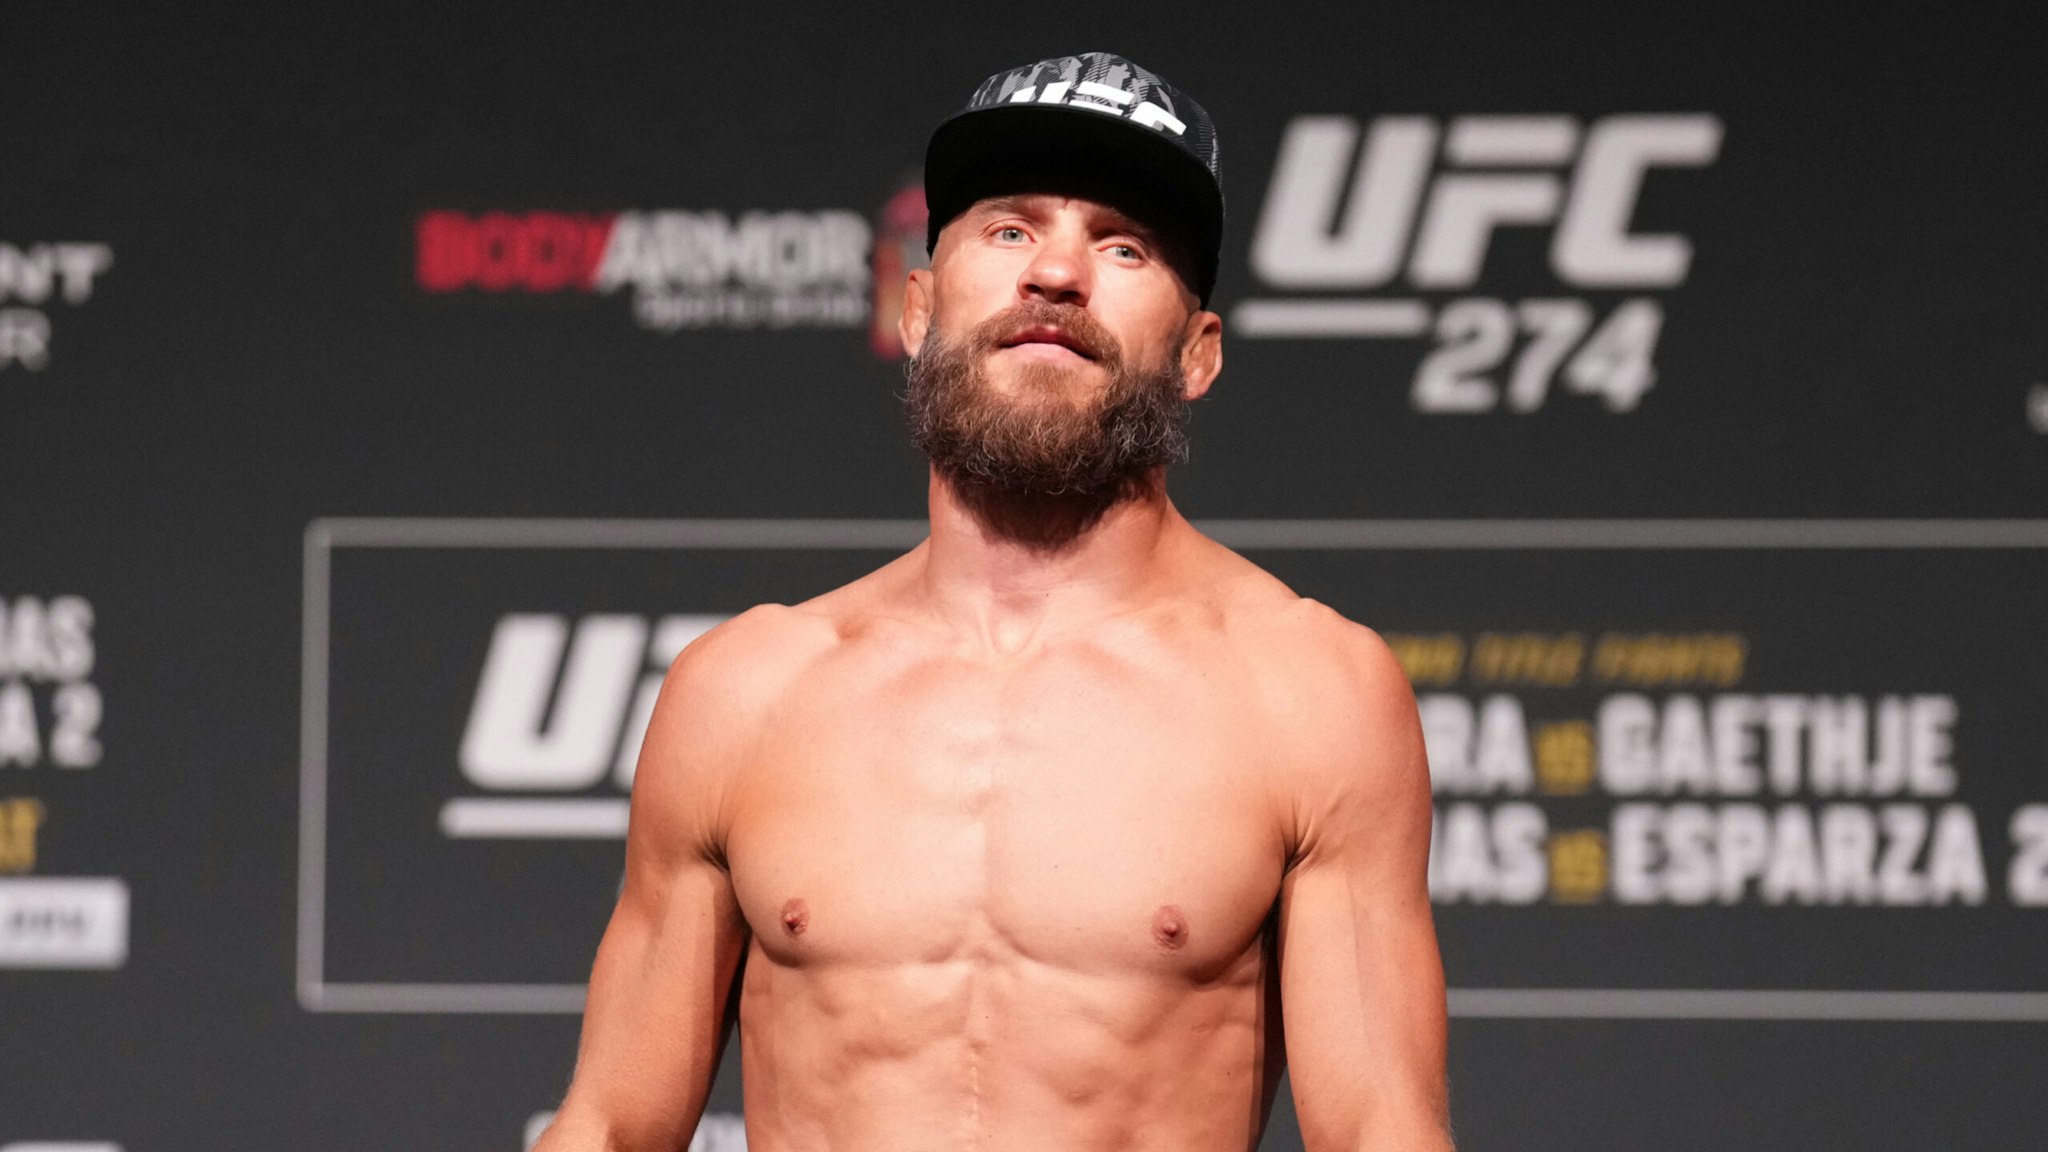 Donald 'Cowboy' Cerrone poses on the scale during the UFC 274 ceremonial weigh-in at the Arizona Federal Theatre on May 06, 2022 in Phoenix, Arizona.